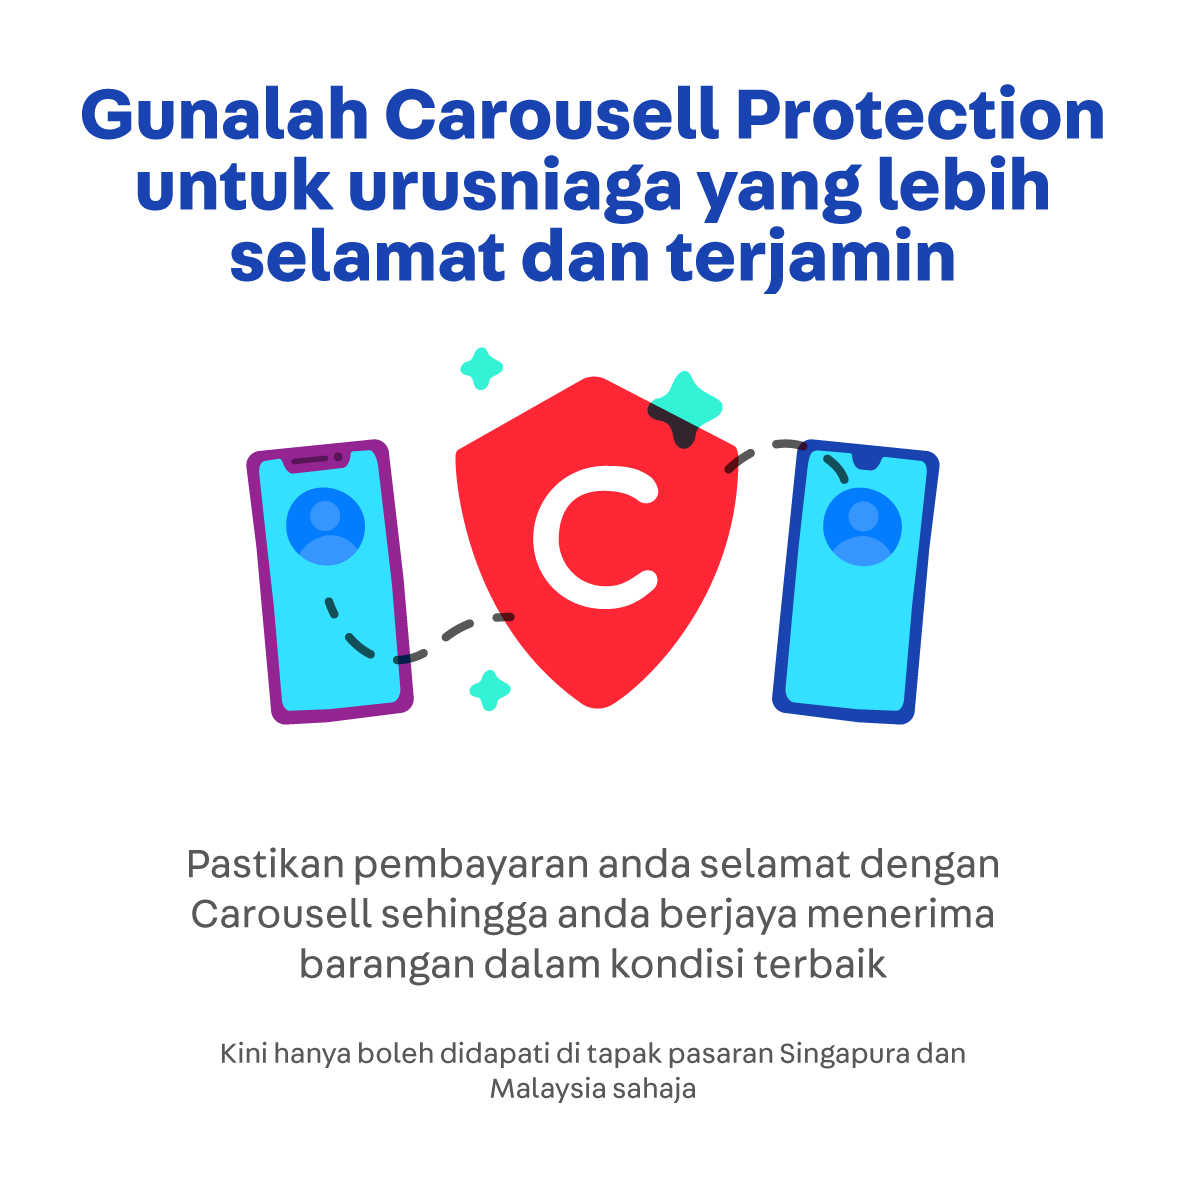 HelpCentre_How-to-deal-safely-on-Carousell_MLY-5.png